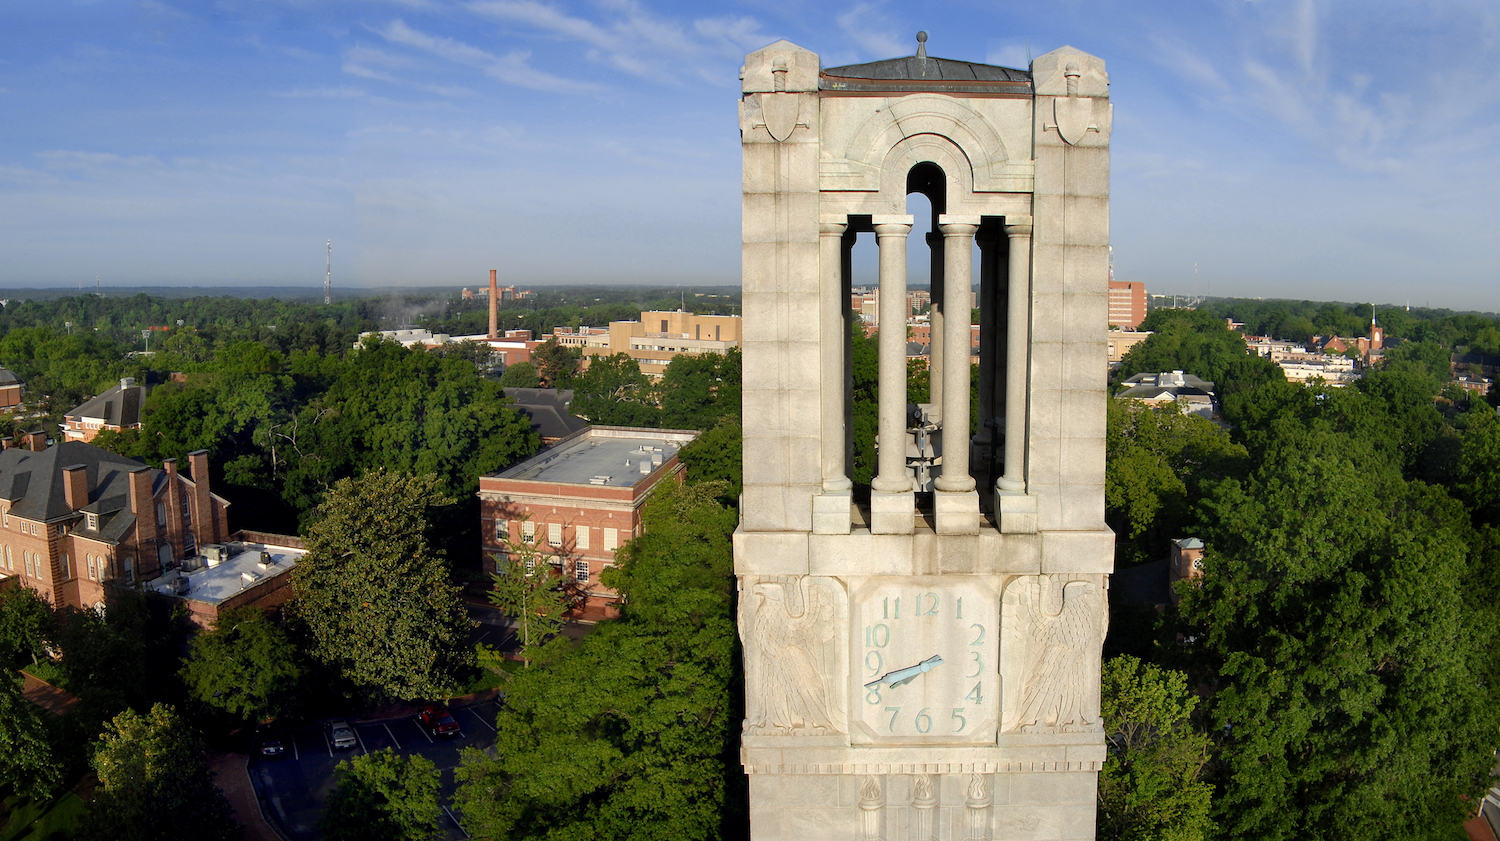 NC State Belltower and campus scene